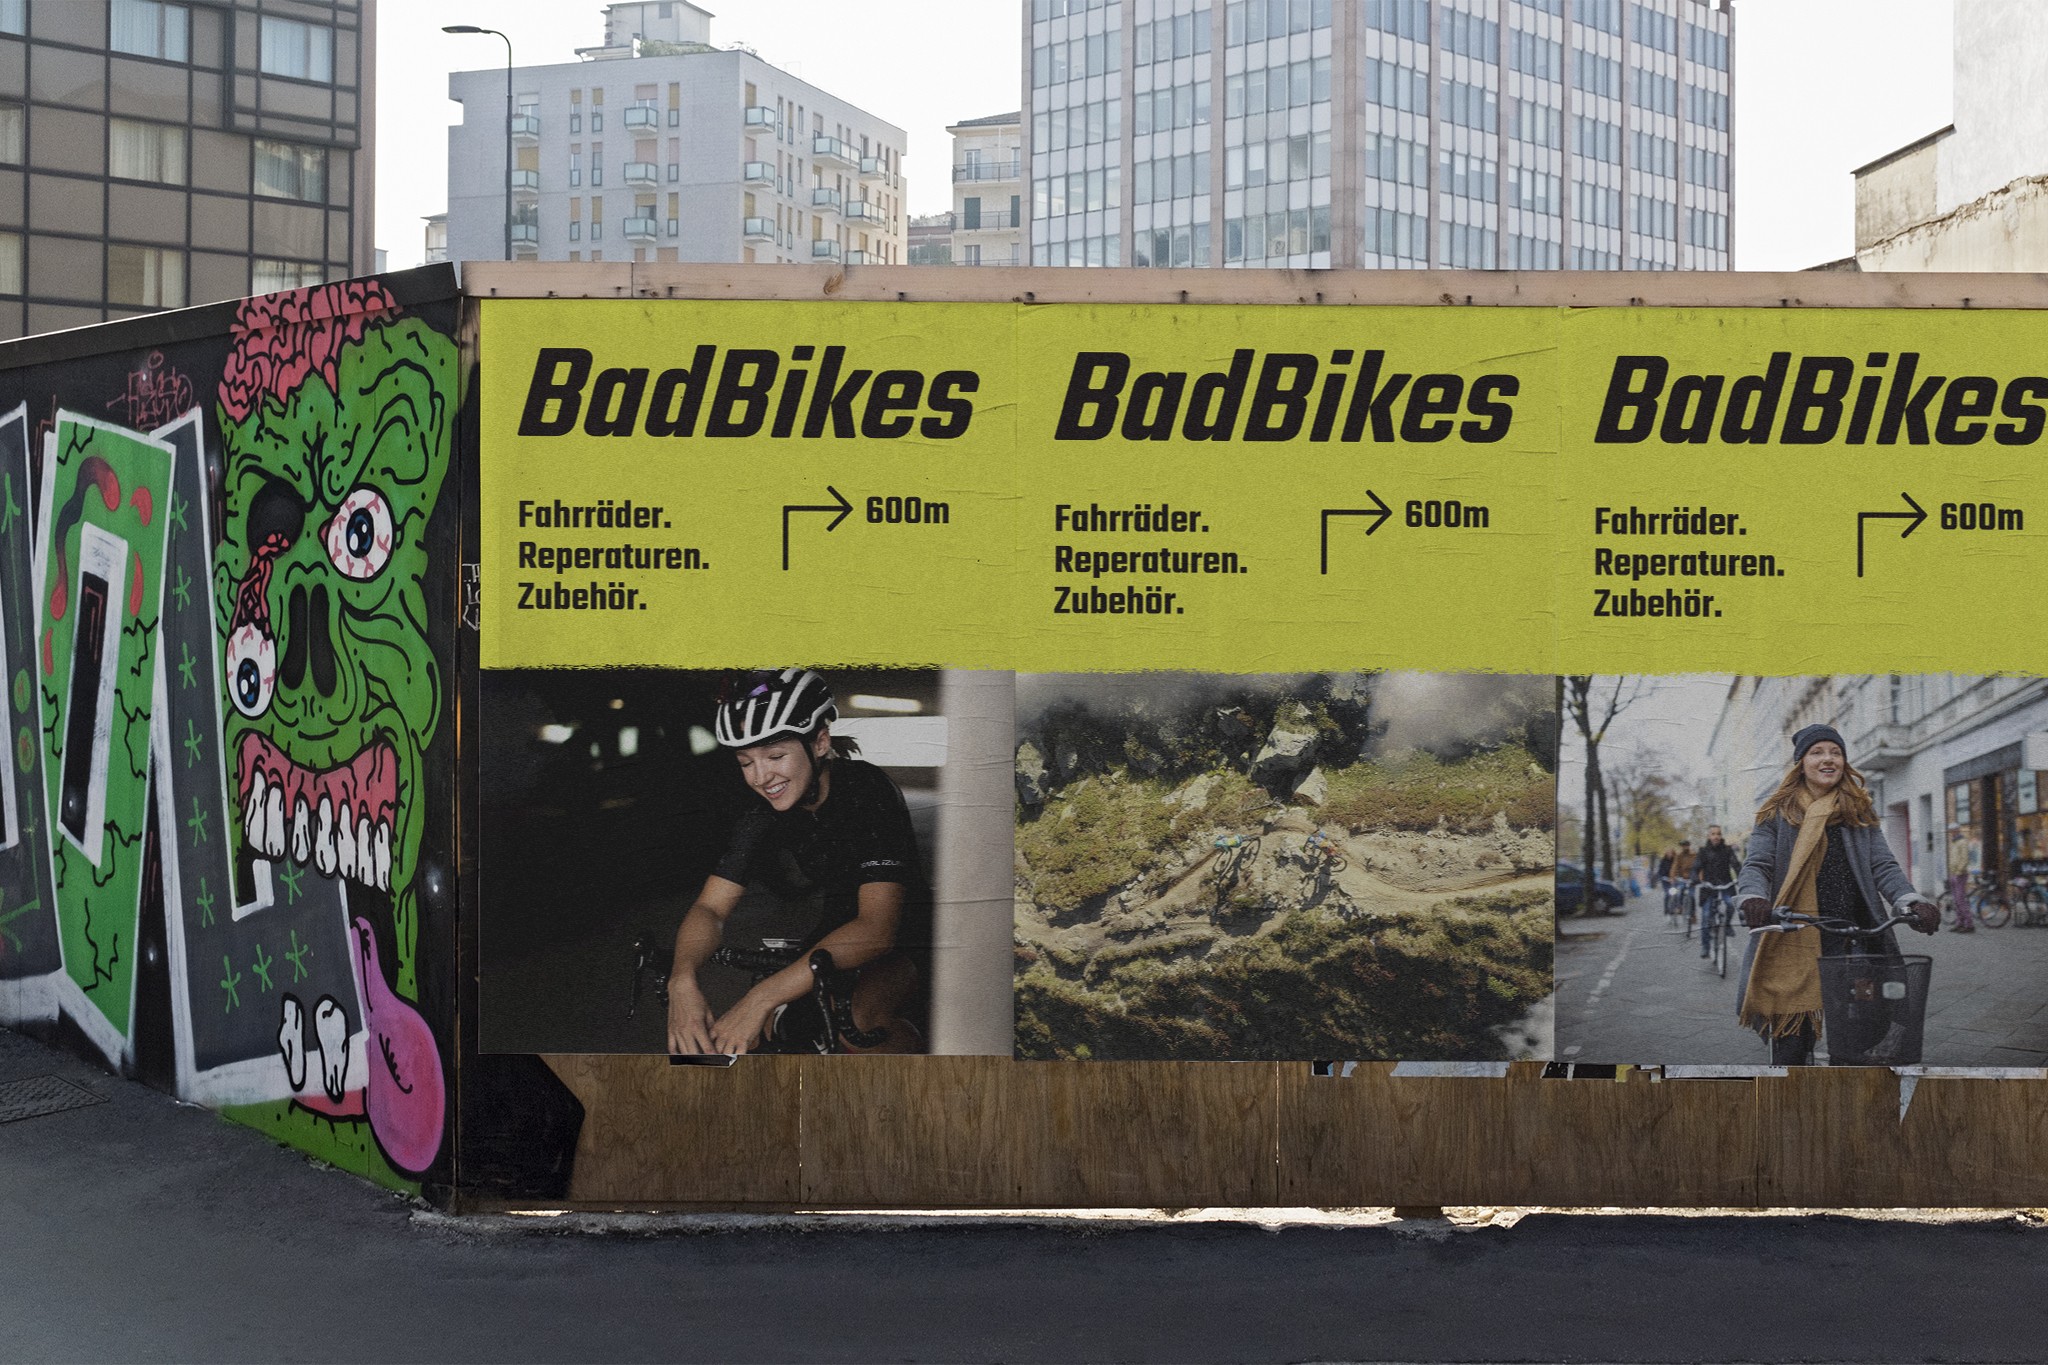 image shows ad of a bicycle shop on a construction fence